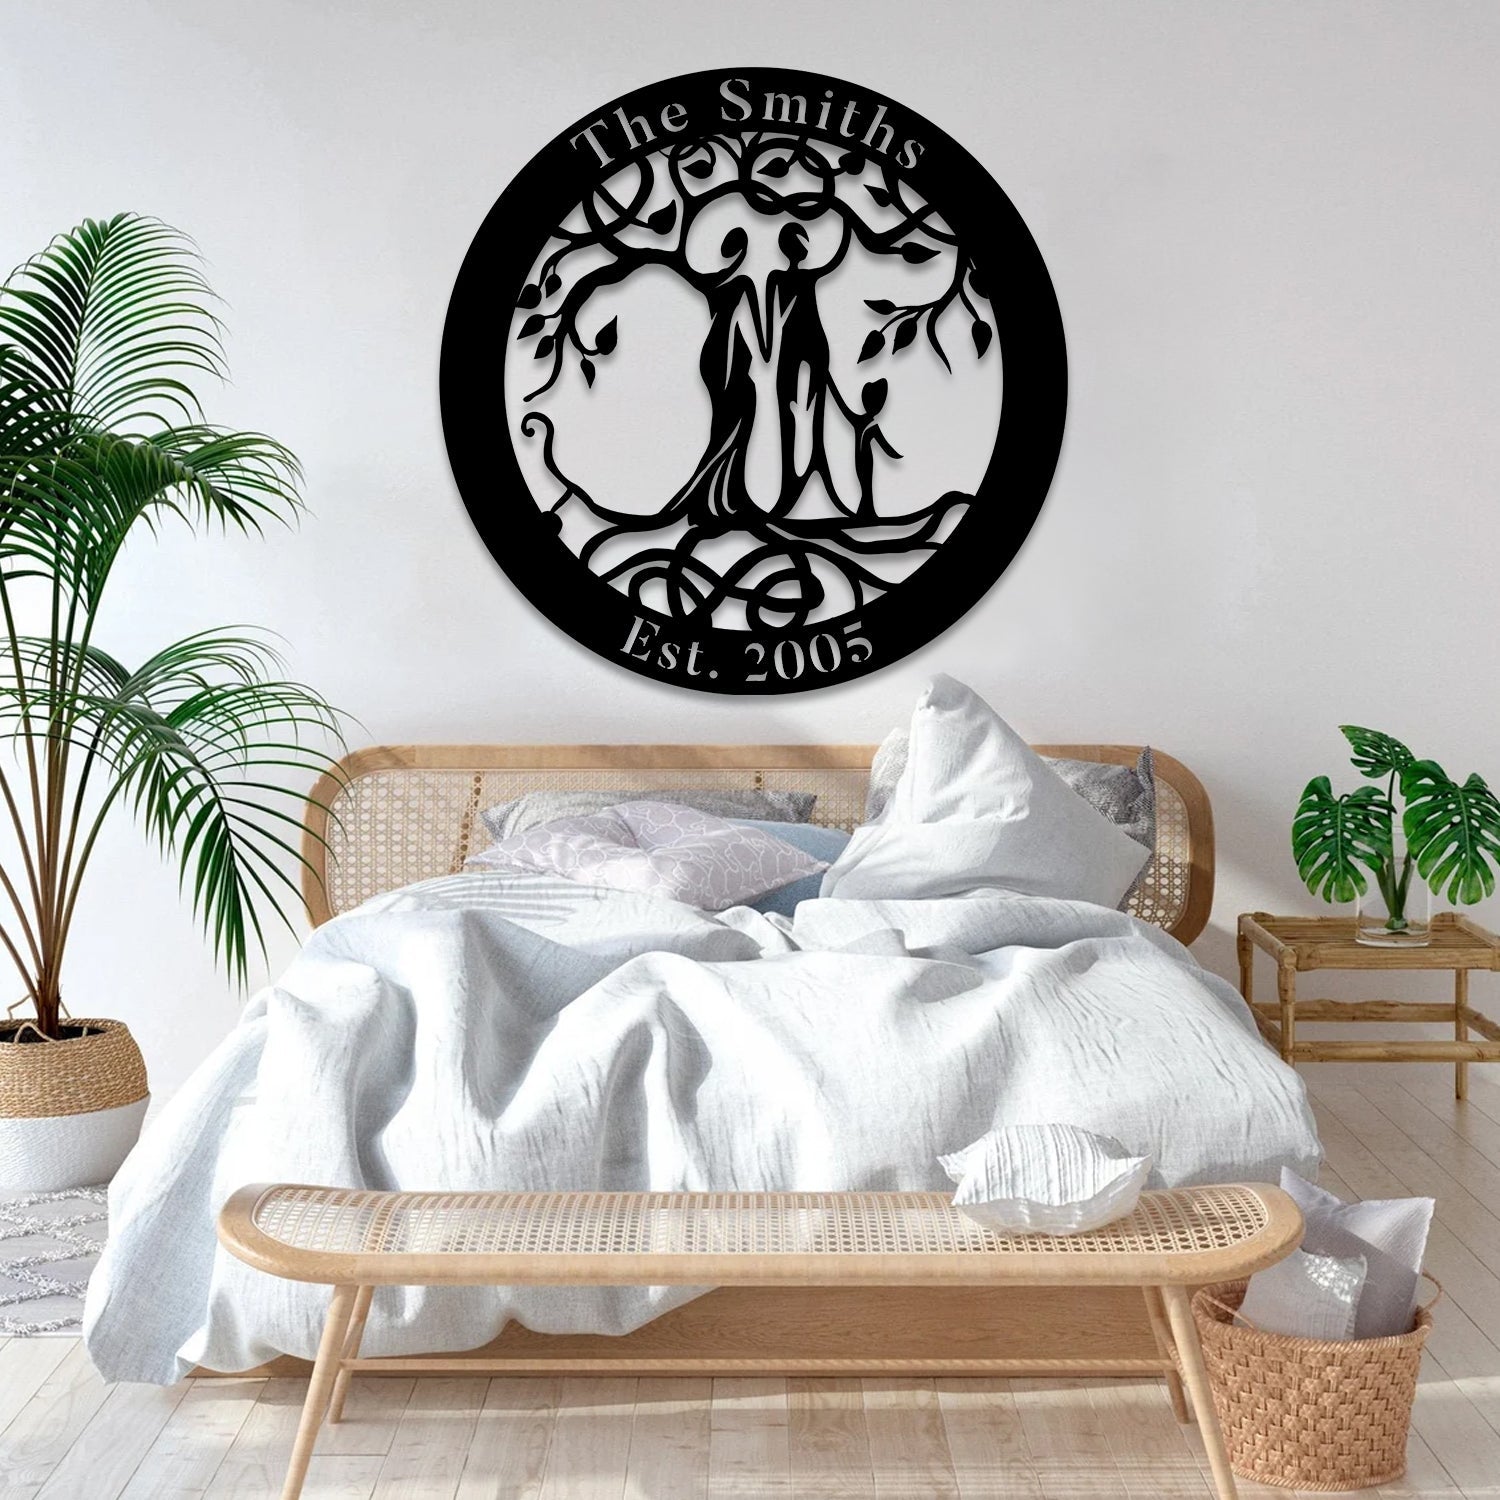 Personalized Family Tree Of Life Metal Art, Housewarming Anniversary Gift